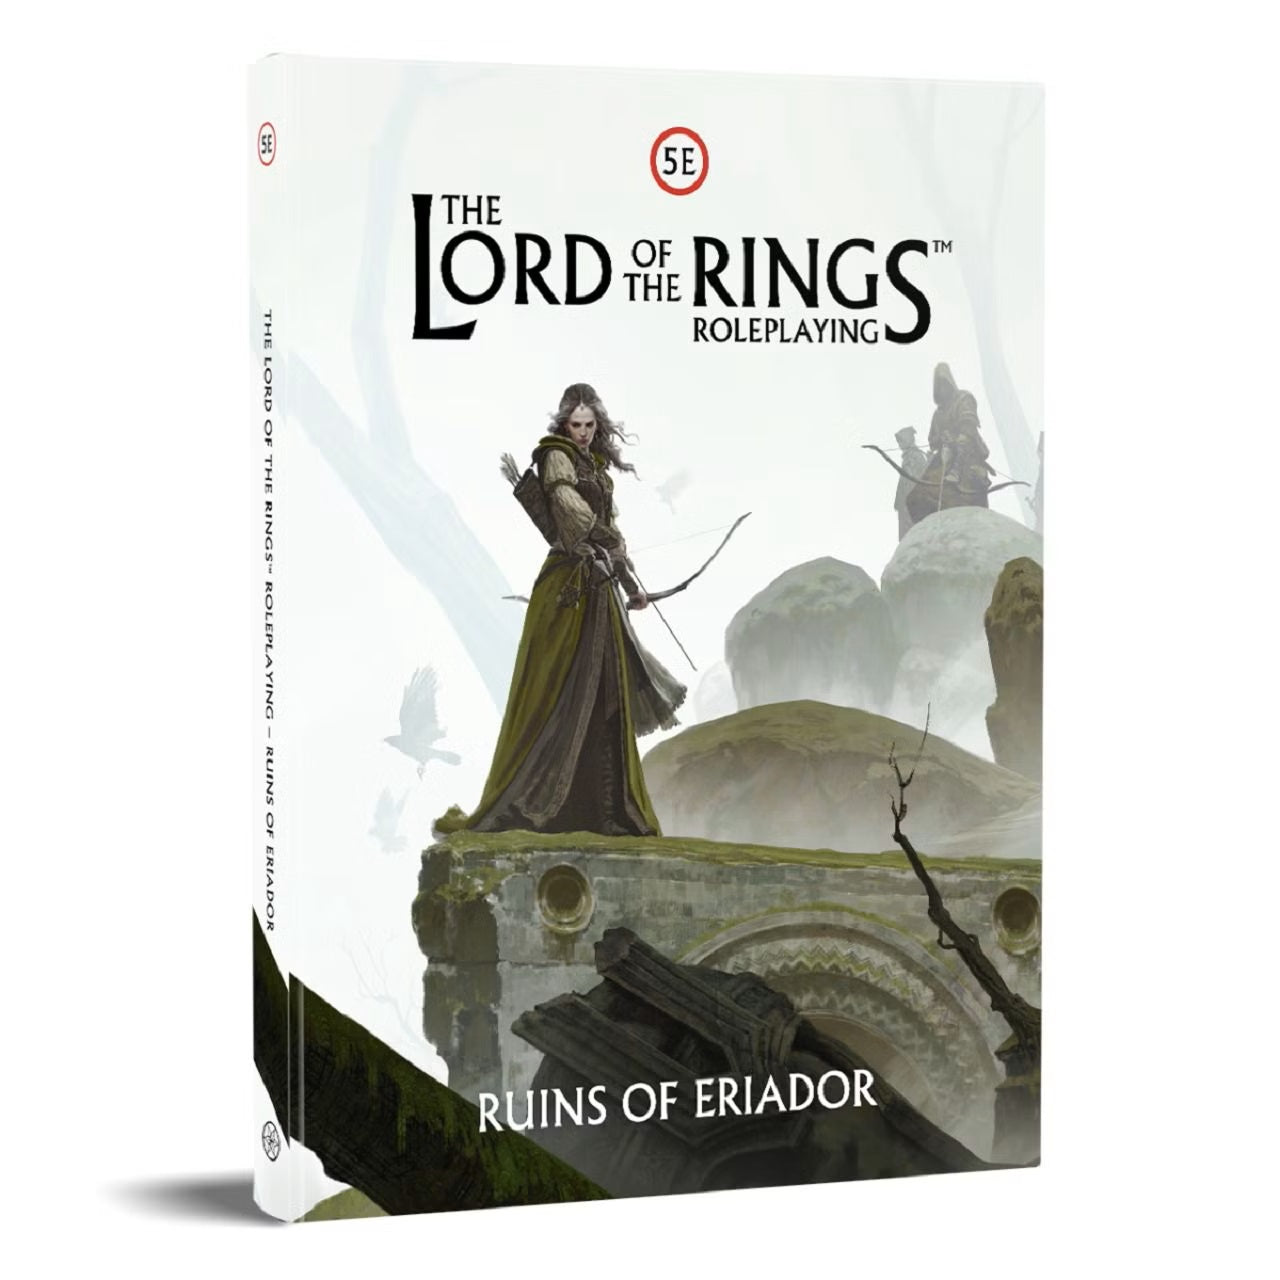 The Lord of the Rings RPG - Ruins of Eriador